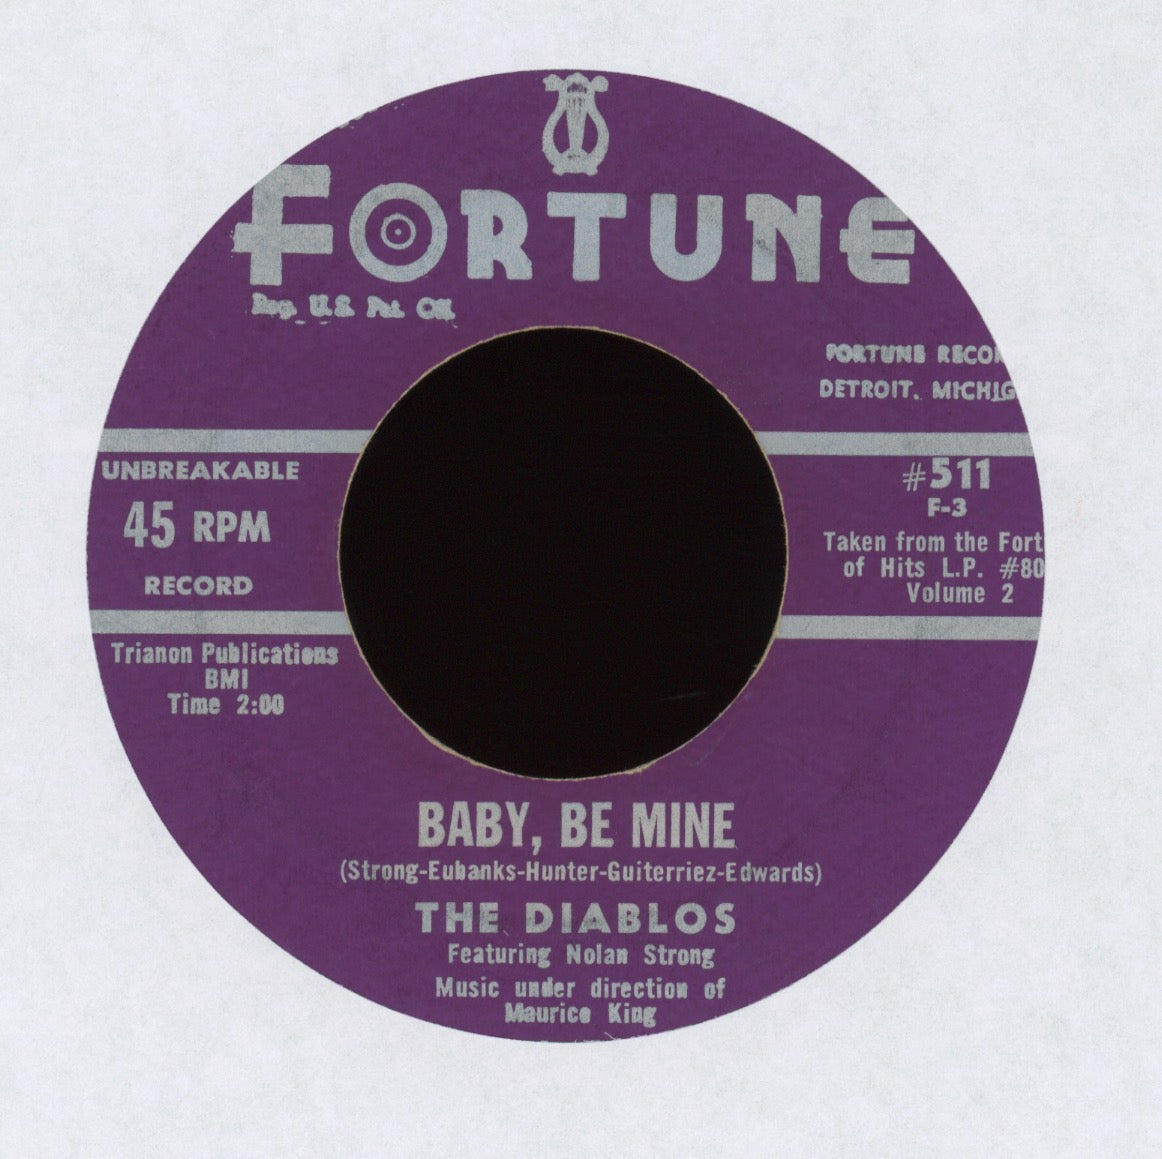 The Diablos - The Wind on Fortune